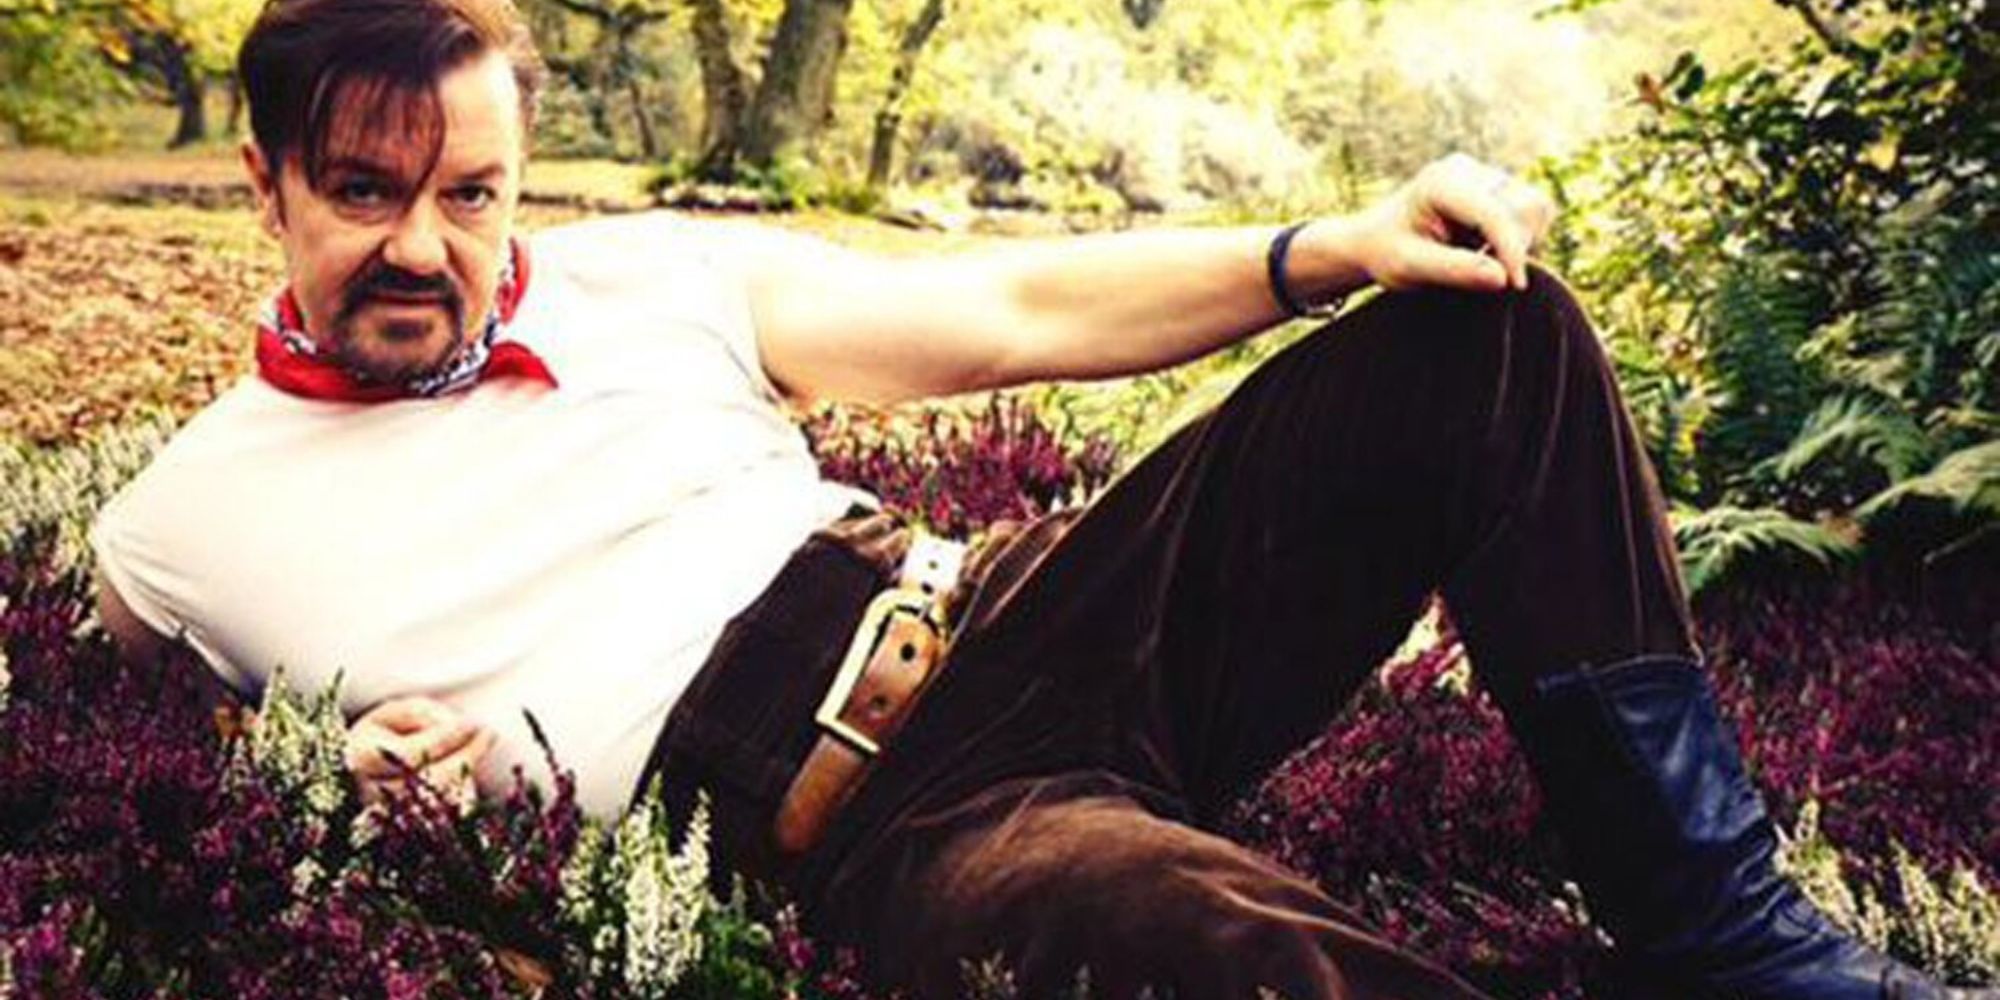 Ricky Gervais as David Brent lounging in a forest